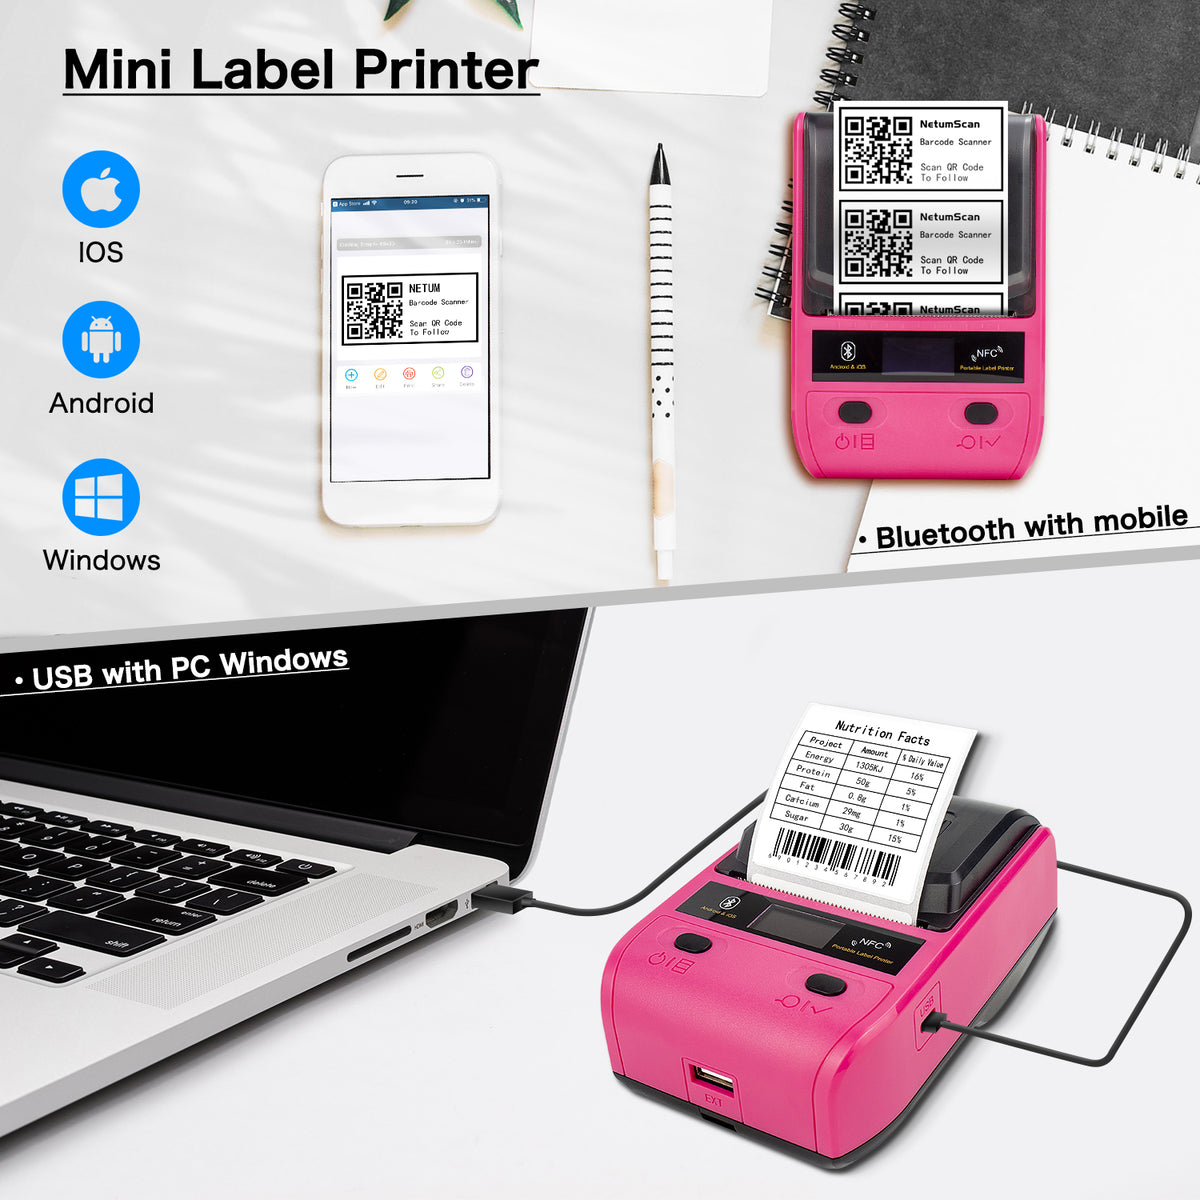 NetumScan Portable Bluetooth Label Maker, Thermal Labe – NETUM